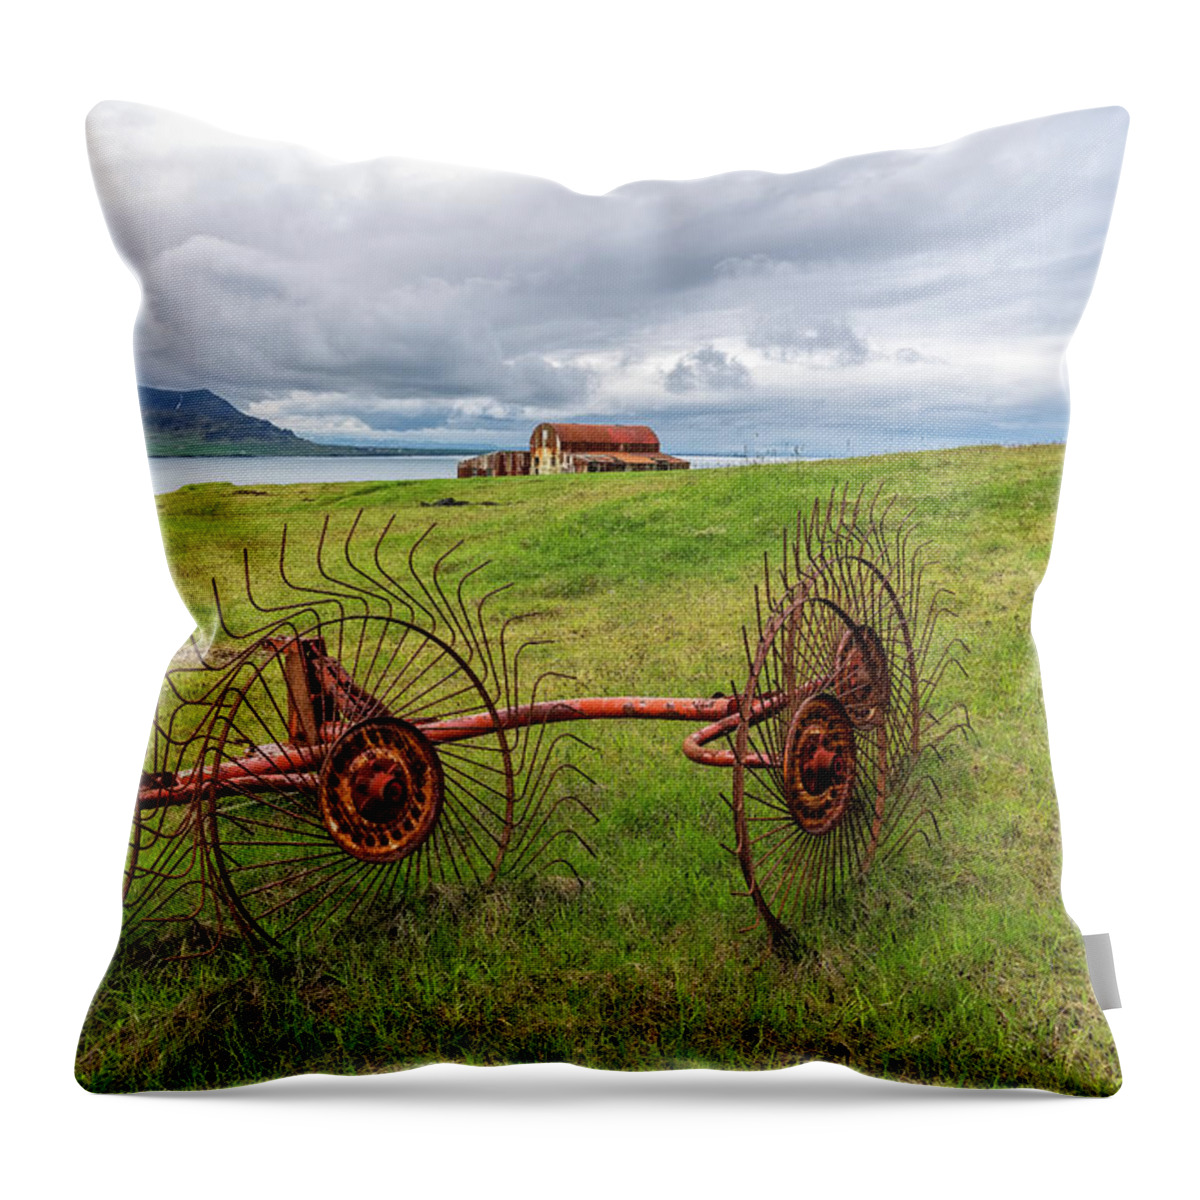 Iceland Throw Pillow featuring the photograph Icelandic Farm by Tom Singleton